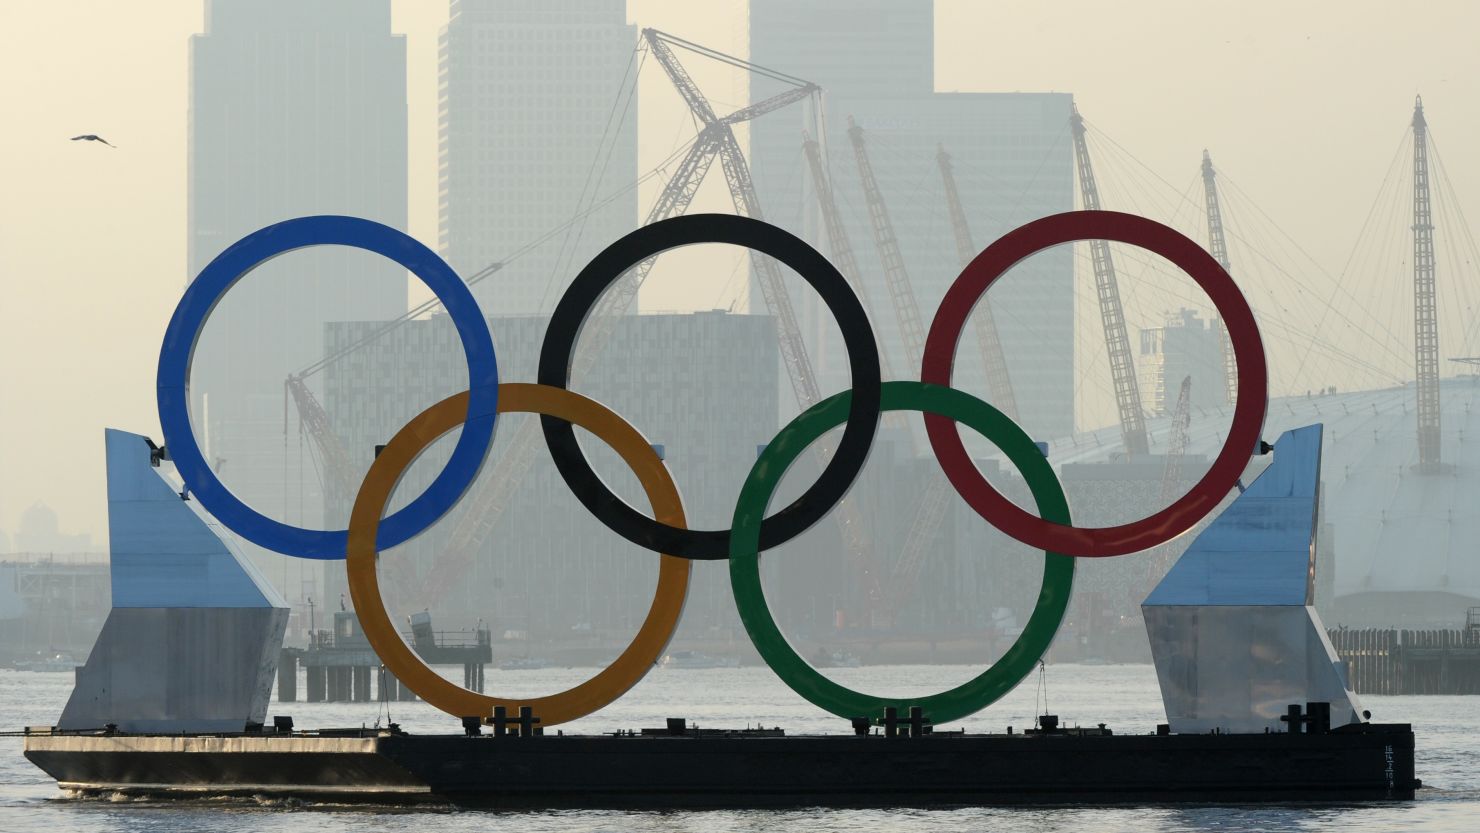  Istanbul, Tokyo and Madrid will compete for the right to host the 2020 Olympic Games.